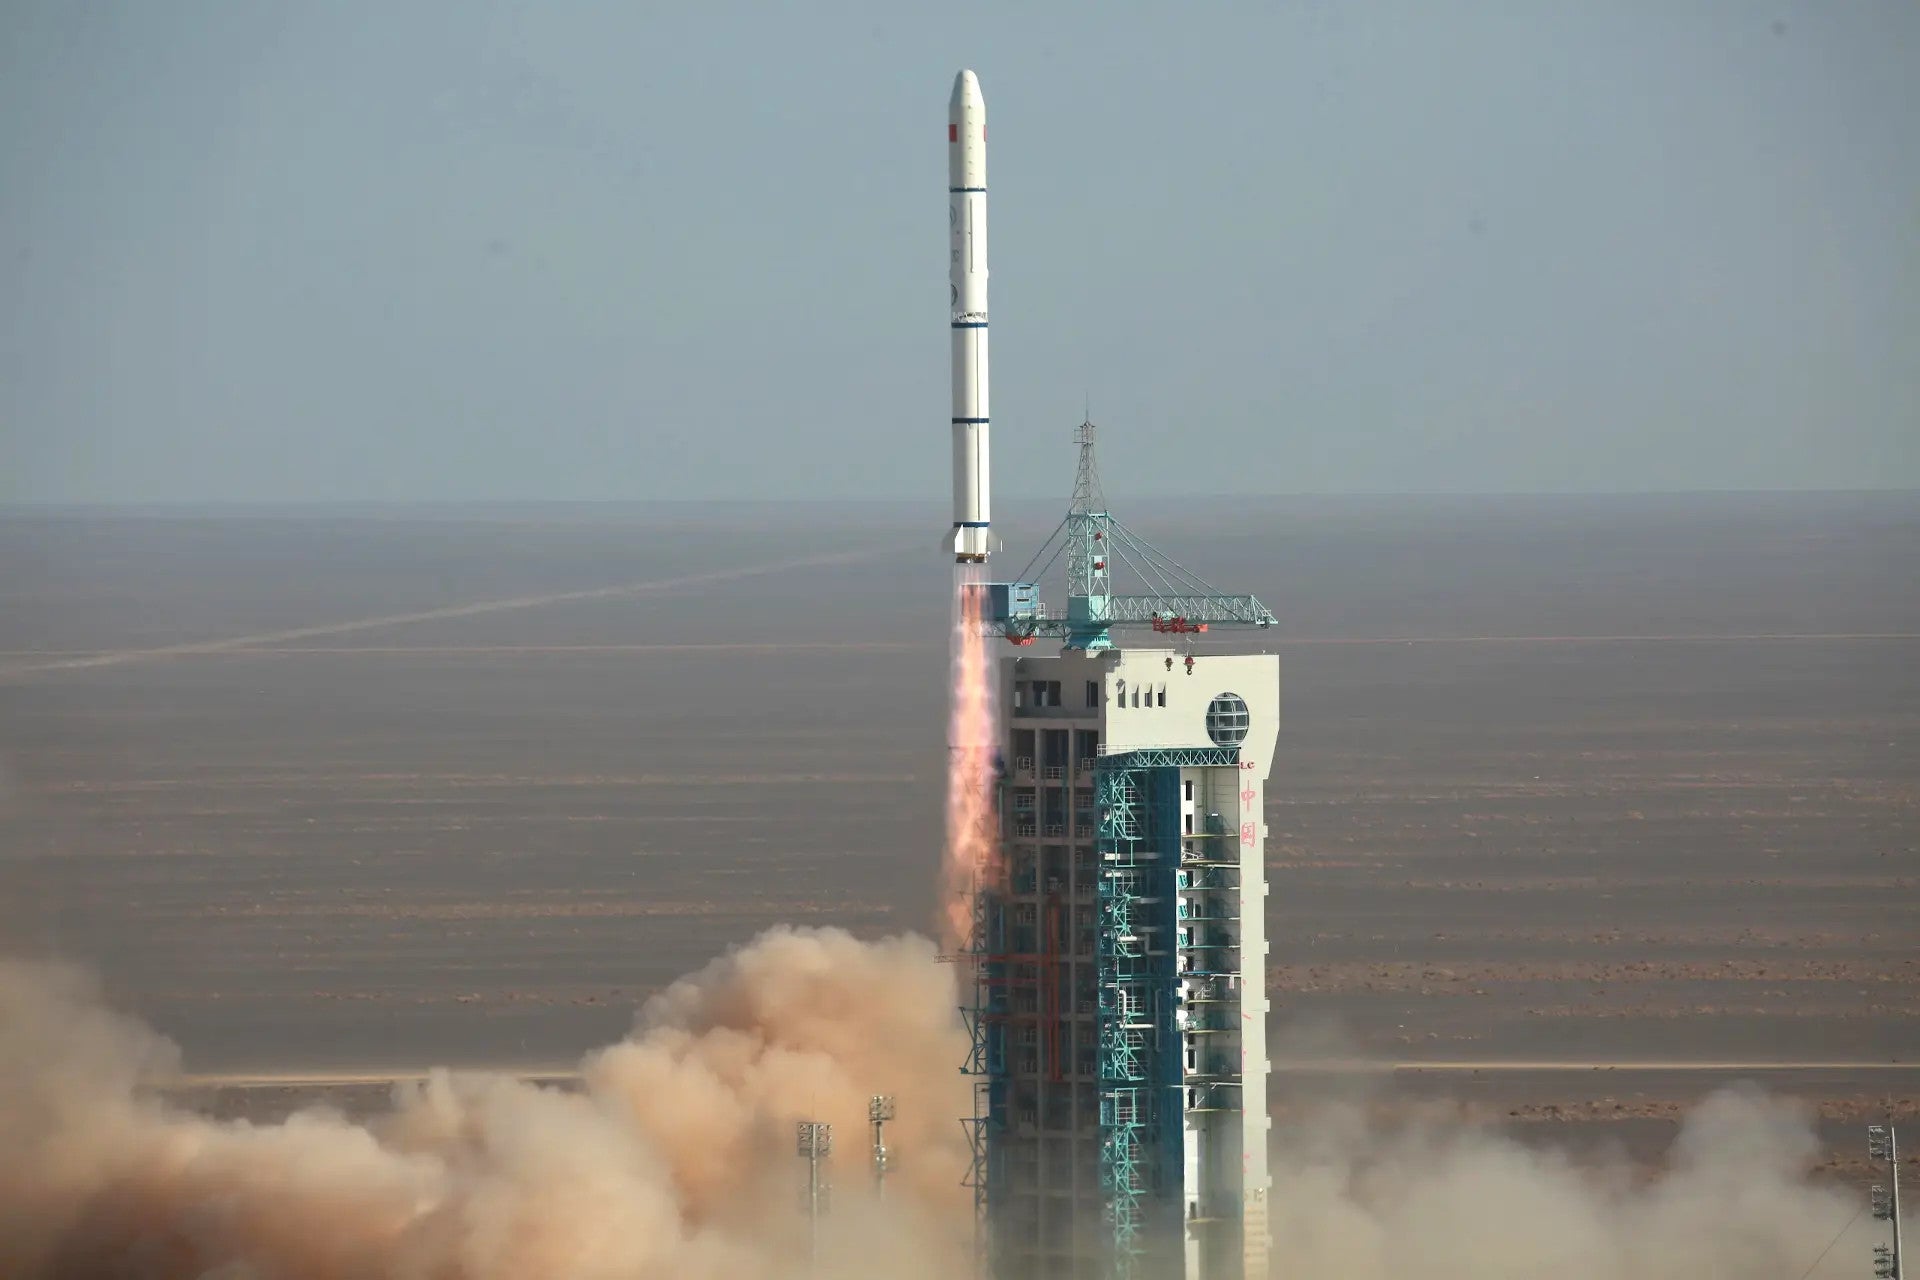 A Long March 2C space launch rocket blasts off from a pad in China. A Long March 2C was reportedly used in at least two test launches of a new orbital weapon system that the Chinese military is developing., CCTV News 